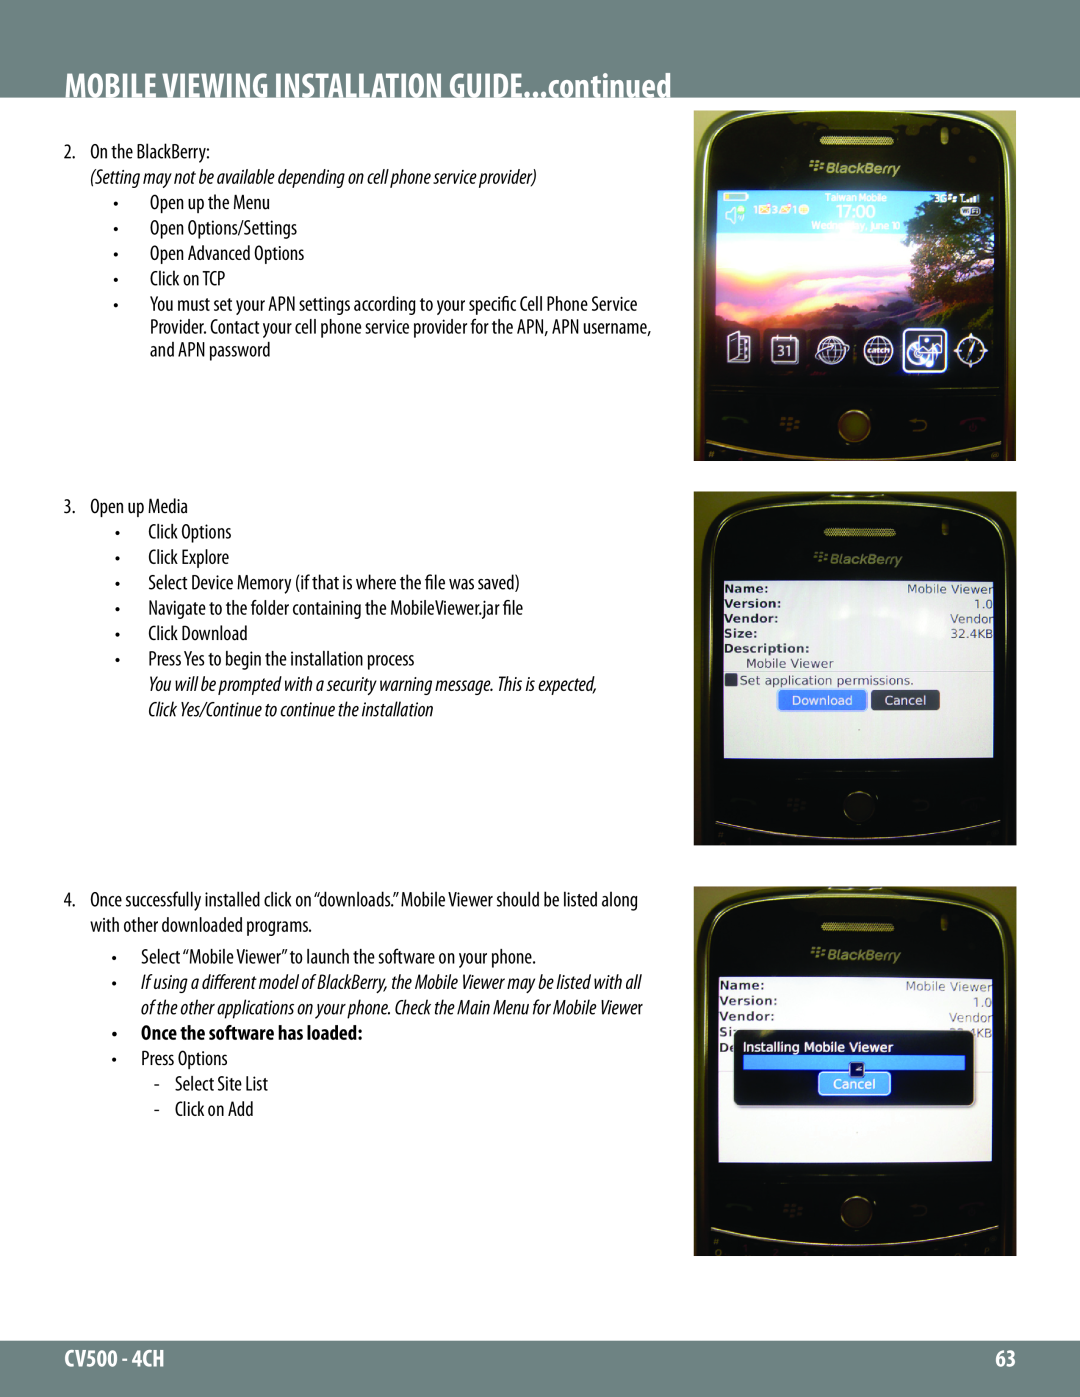 SVAT Electronics 2CV500 - 4CH MOBILE VIEWING INSTALLATION GUIDE...continued, •Once the software has loaded 